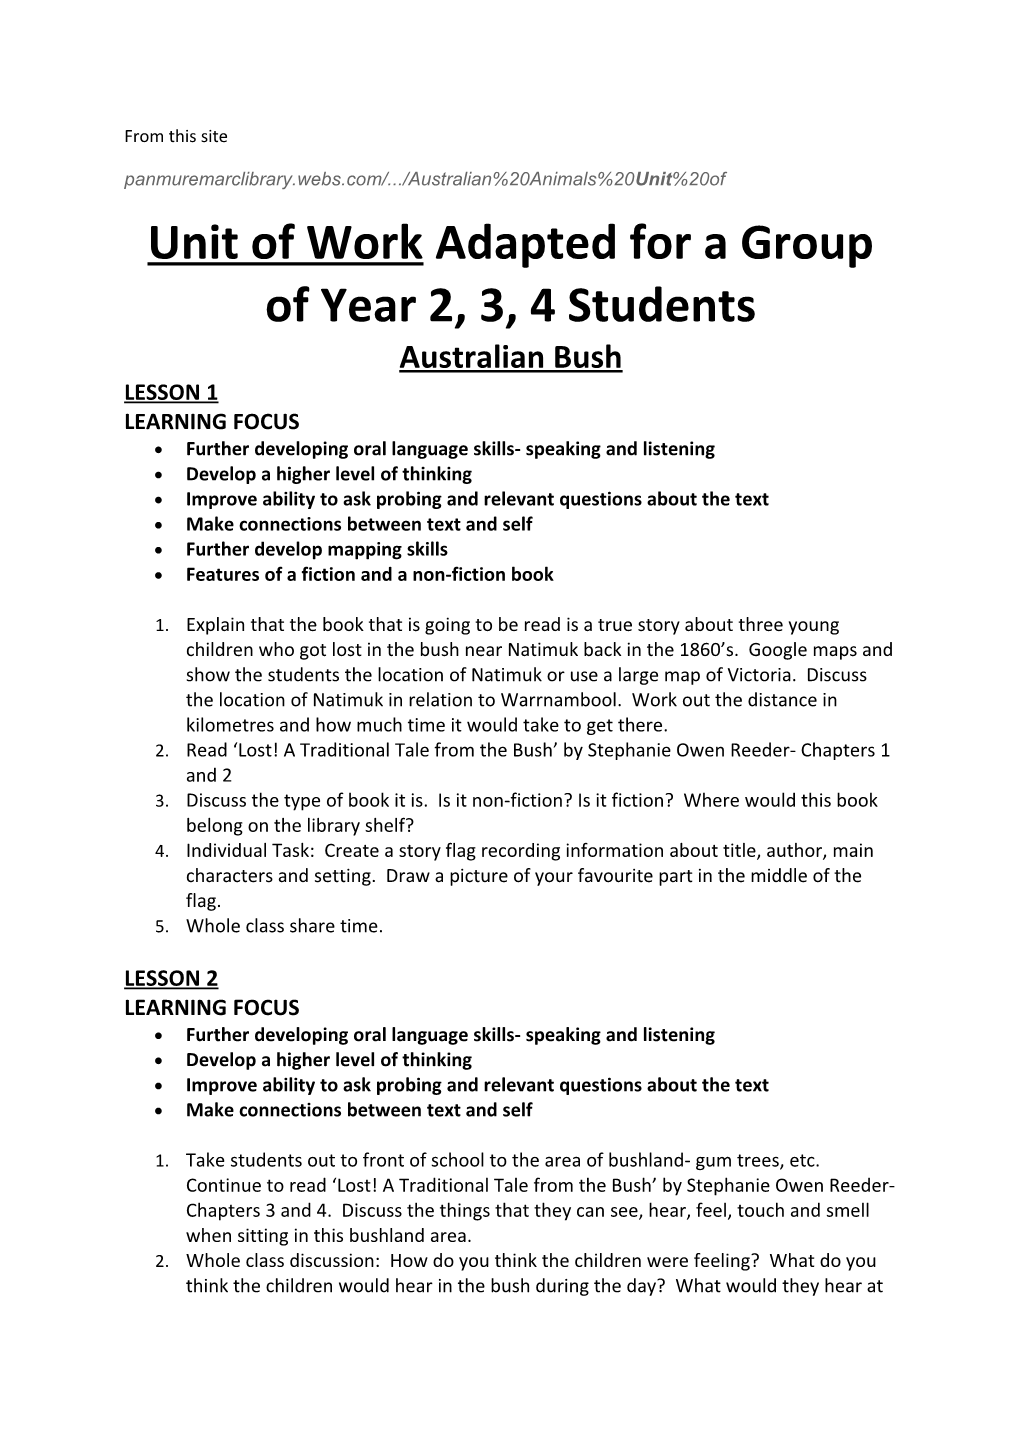 Unit of Work Adapted for a Group of Year 2, 3, 4 Students